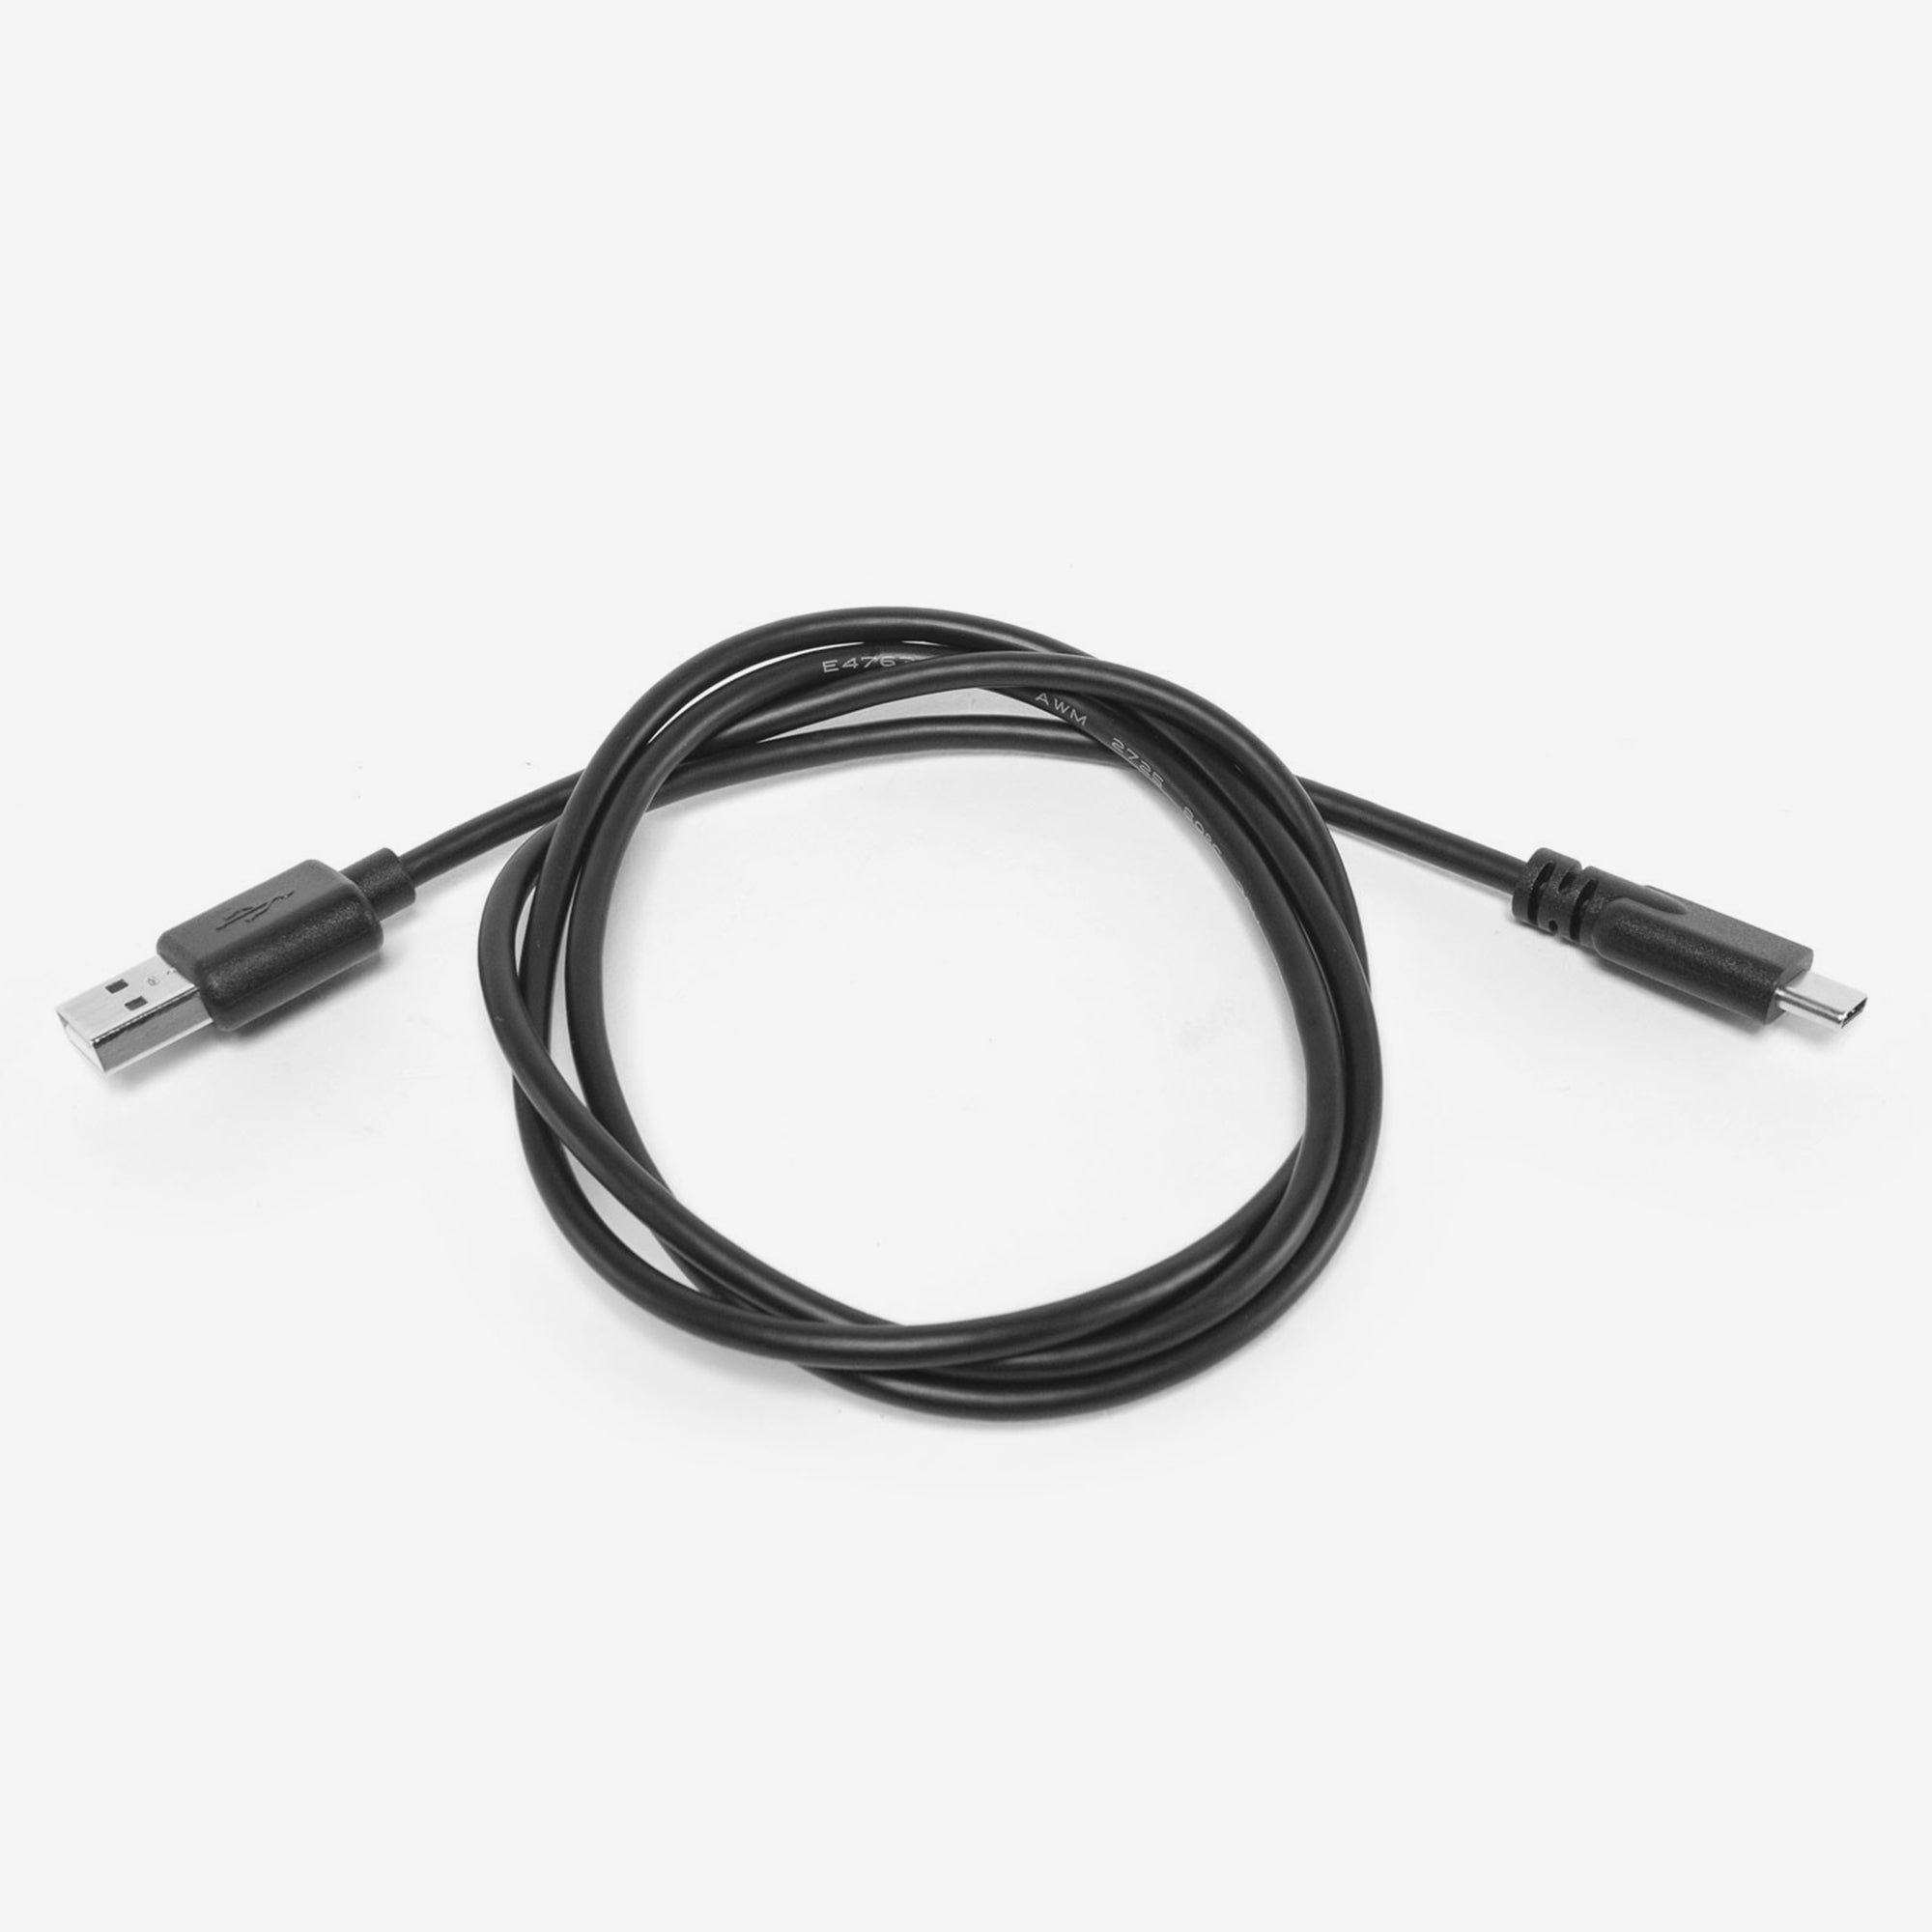 USB C to USB A 2.0 Cable (1 m)